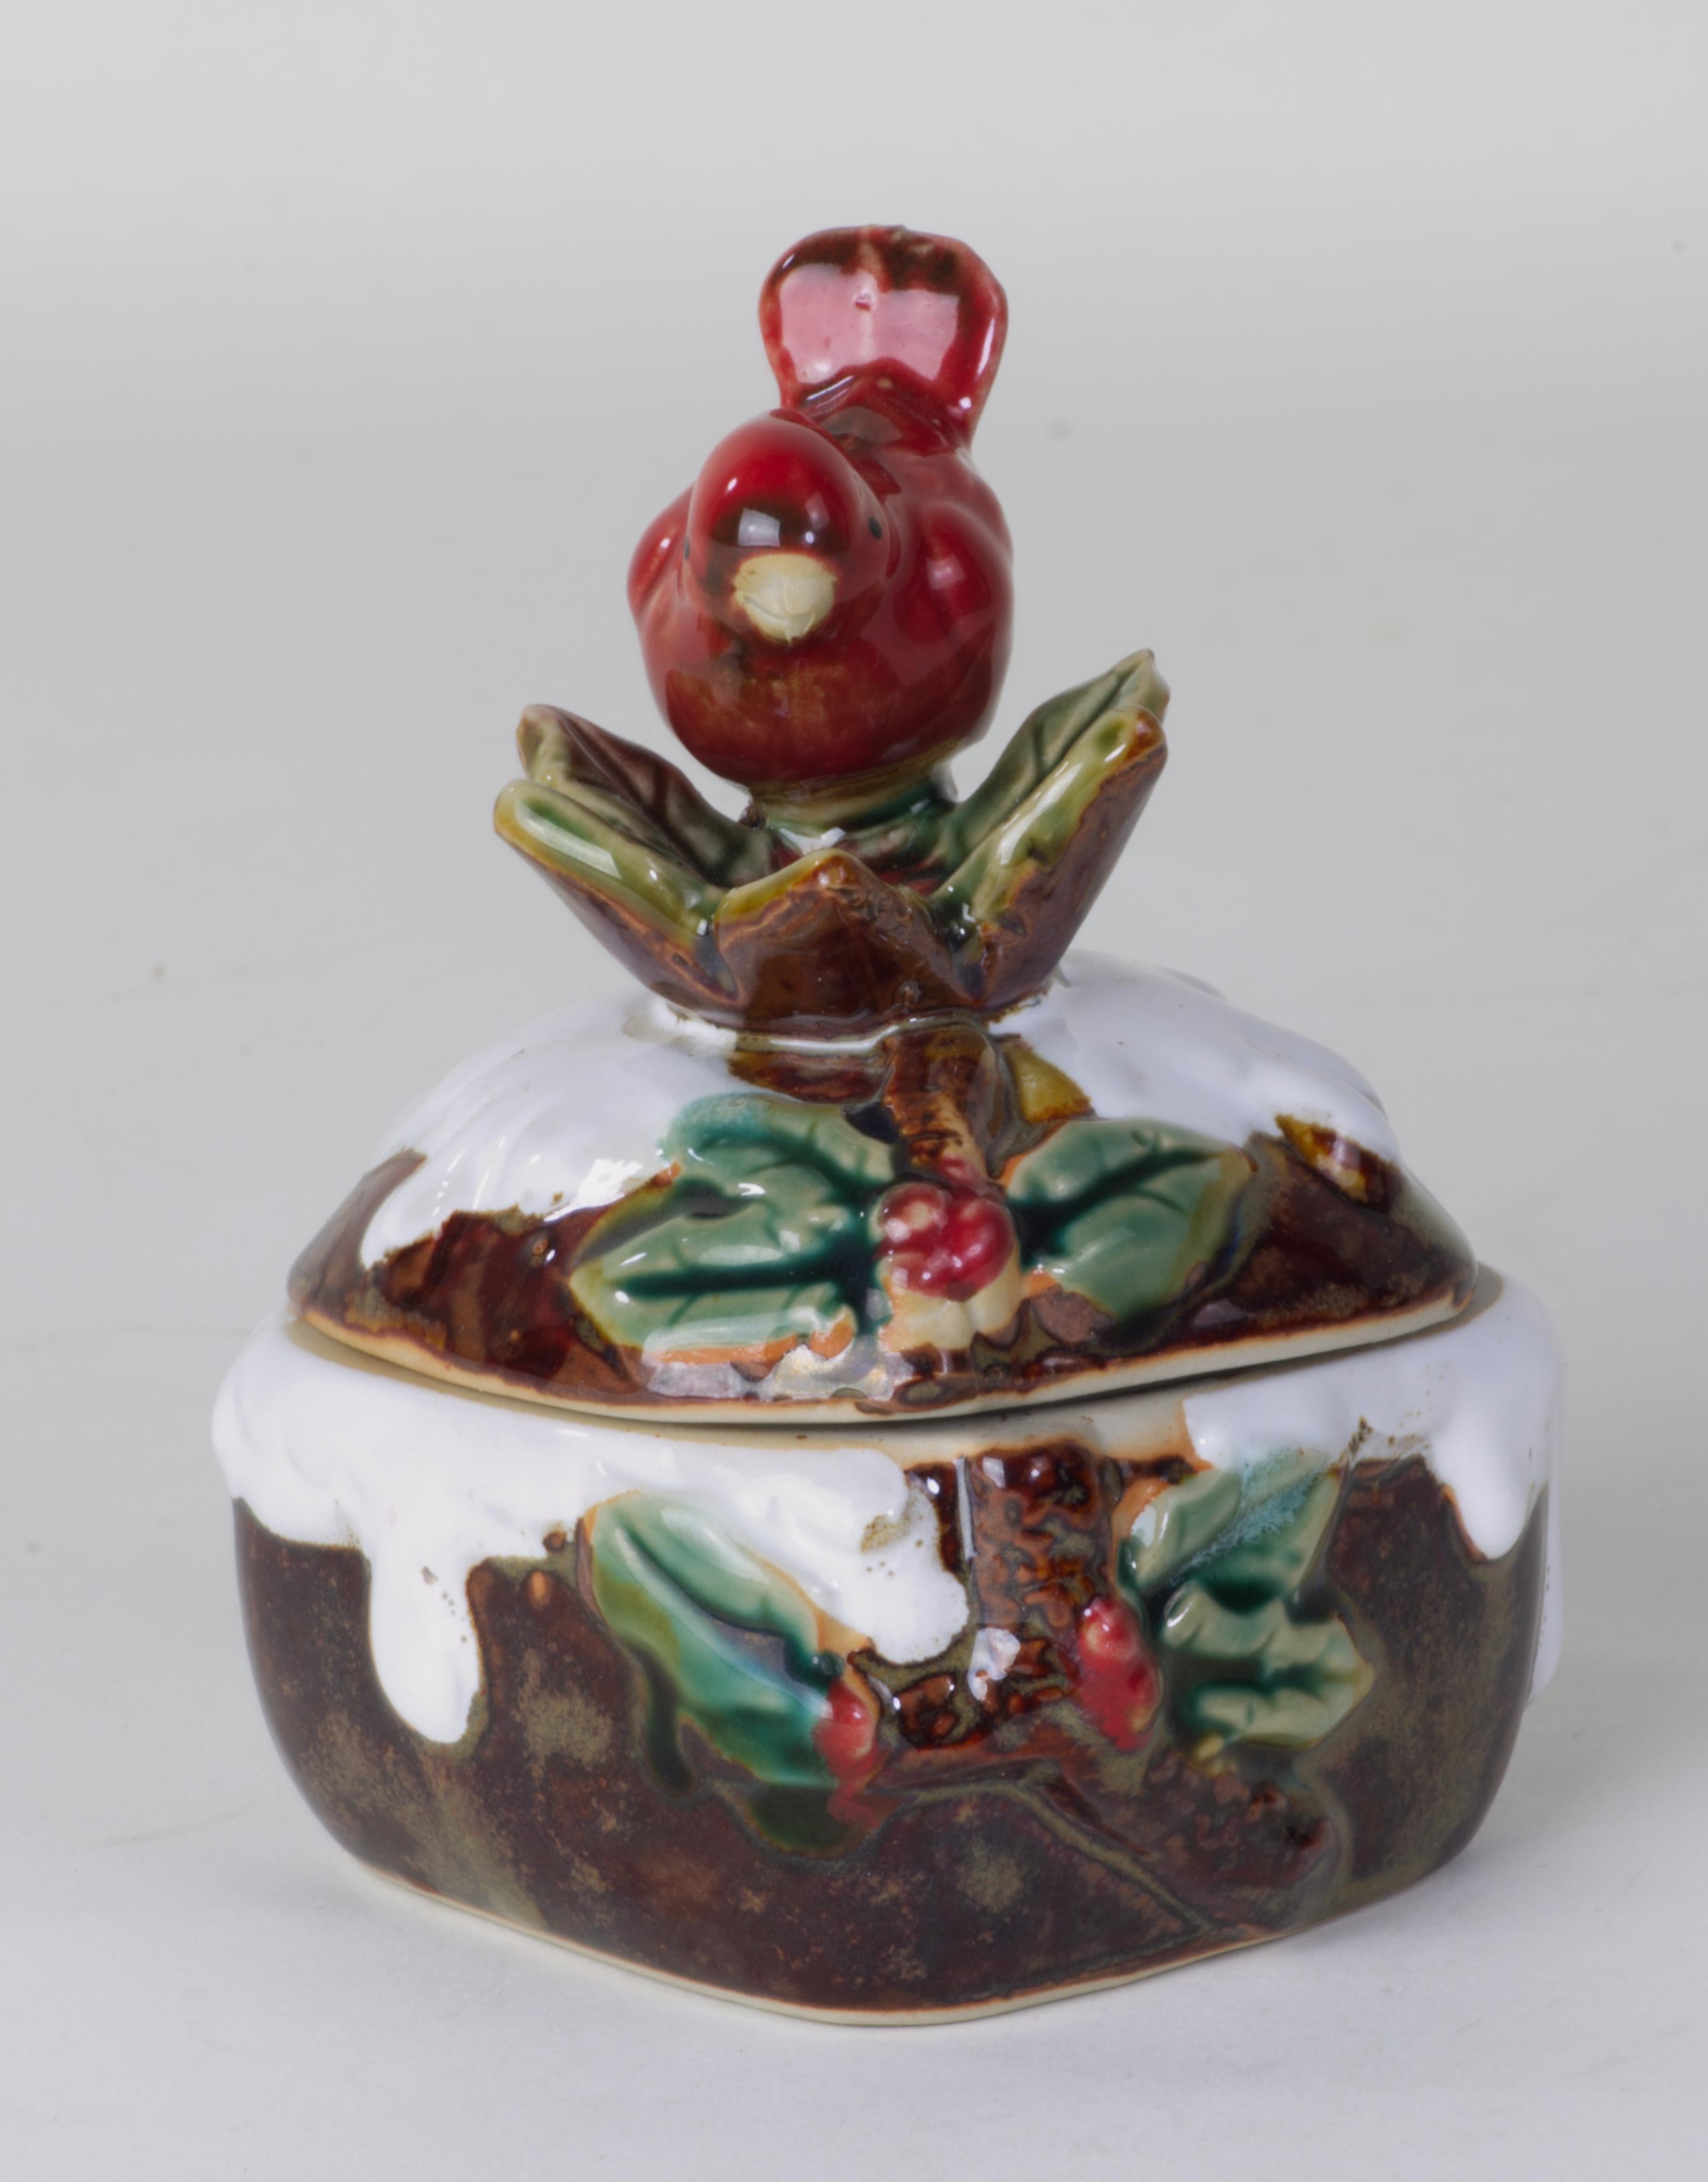 
Studio pottery bowl with lid is decorated with extremely detailed hand formed bird, leaves, and berries. The bird is done in red glaze with brown shading and black eyes; the beak is left unglazed and is shaped to create a realistic portrayal of a